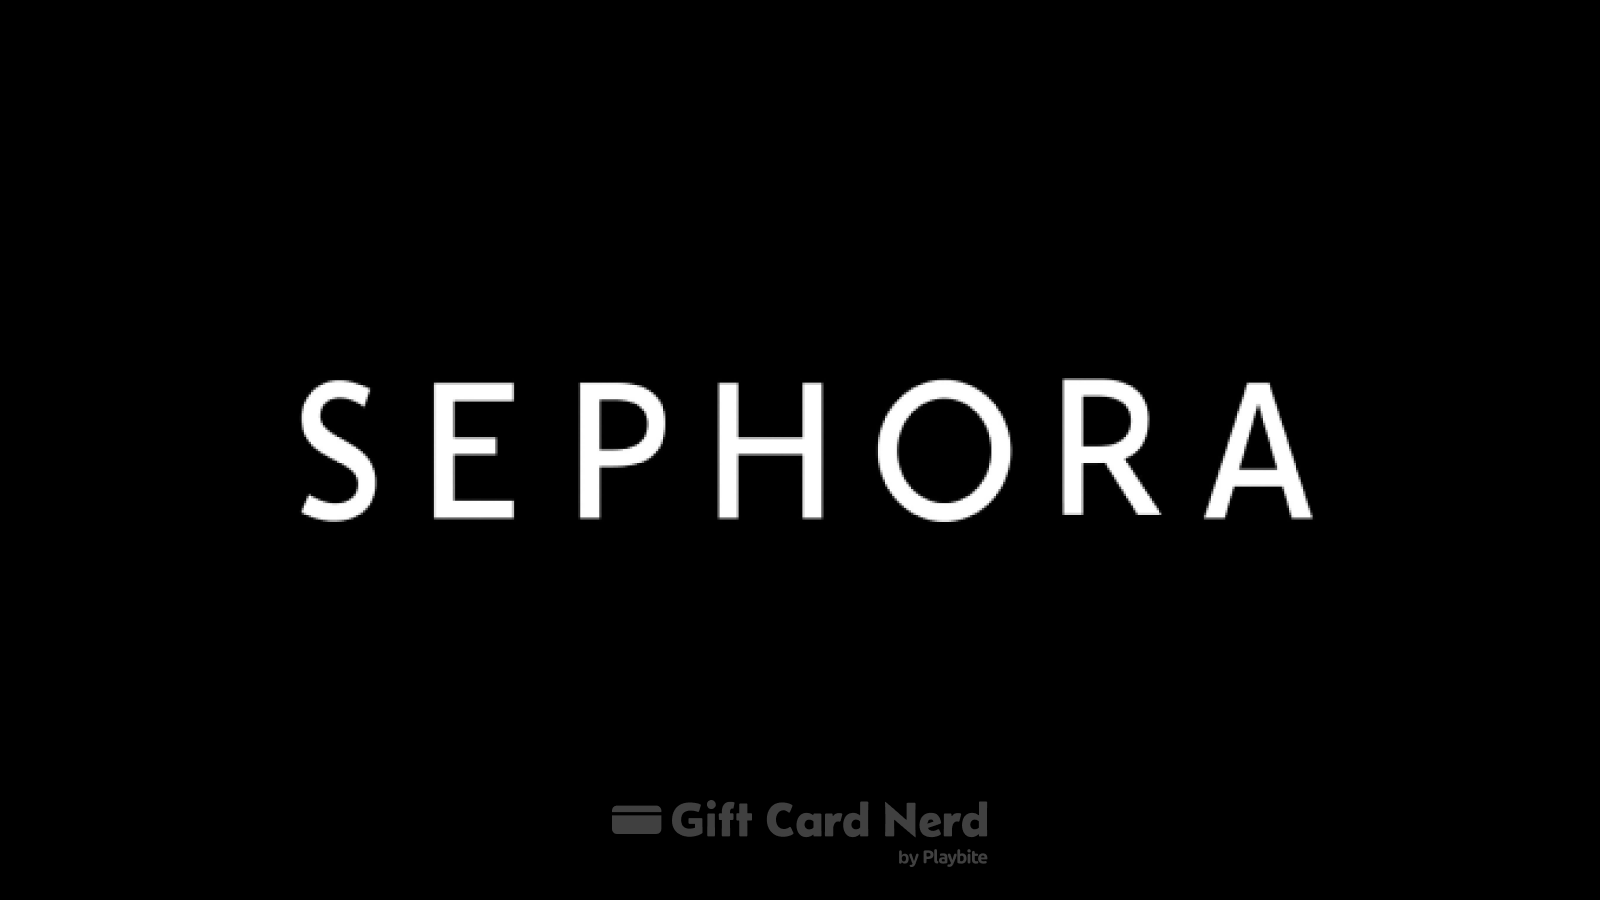 Can I Use a Sephora Gift Card on Venmo?